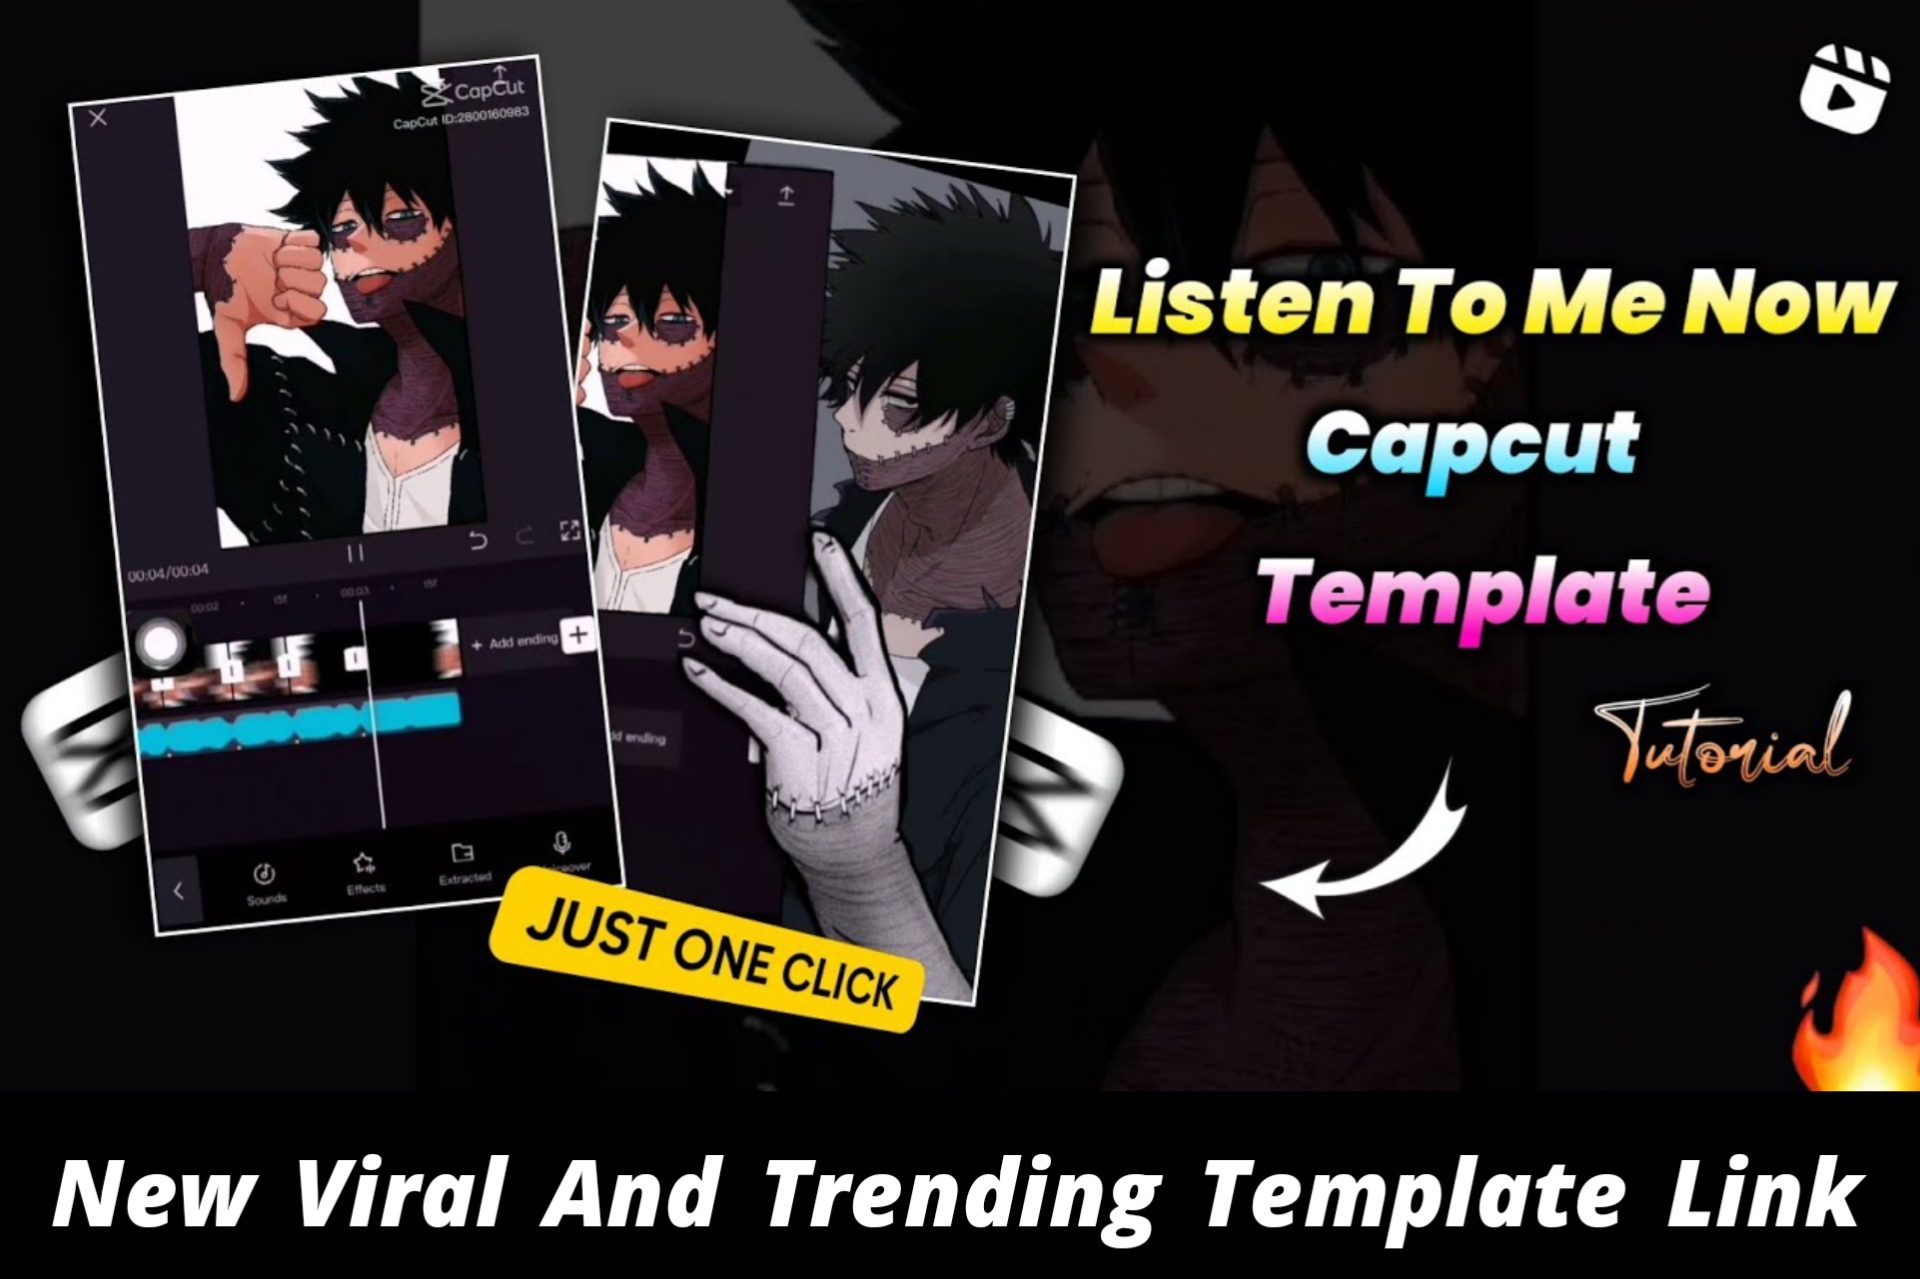 Listen to me now CapCut Template | Best 01 Template - JF Tech Zone